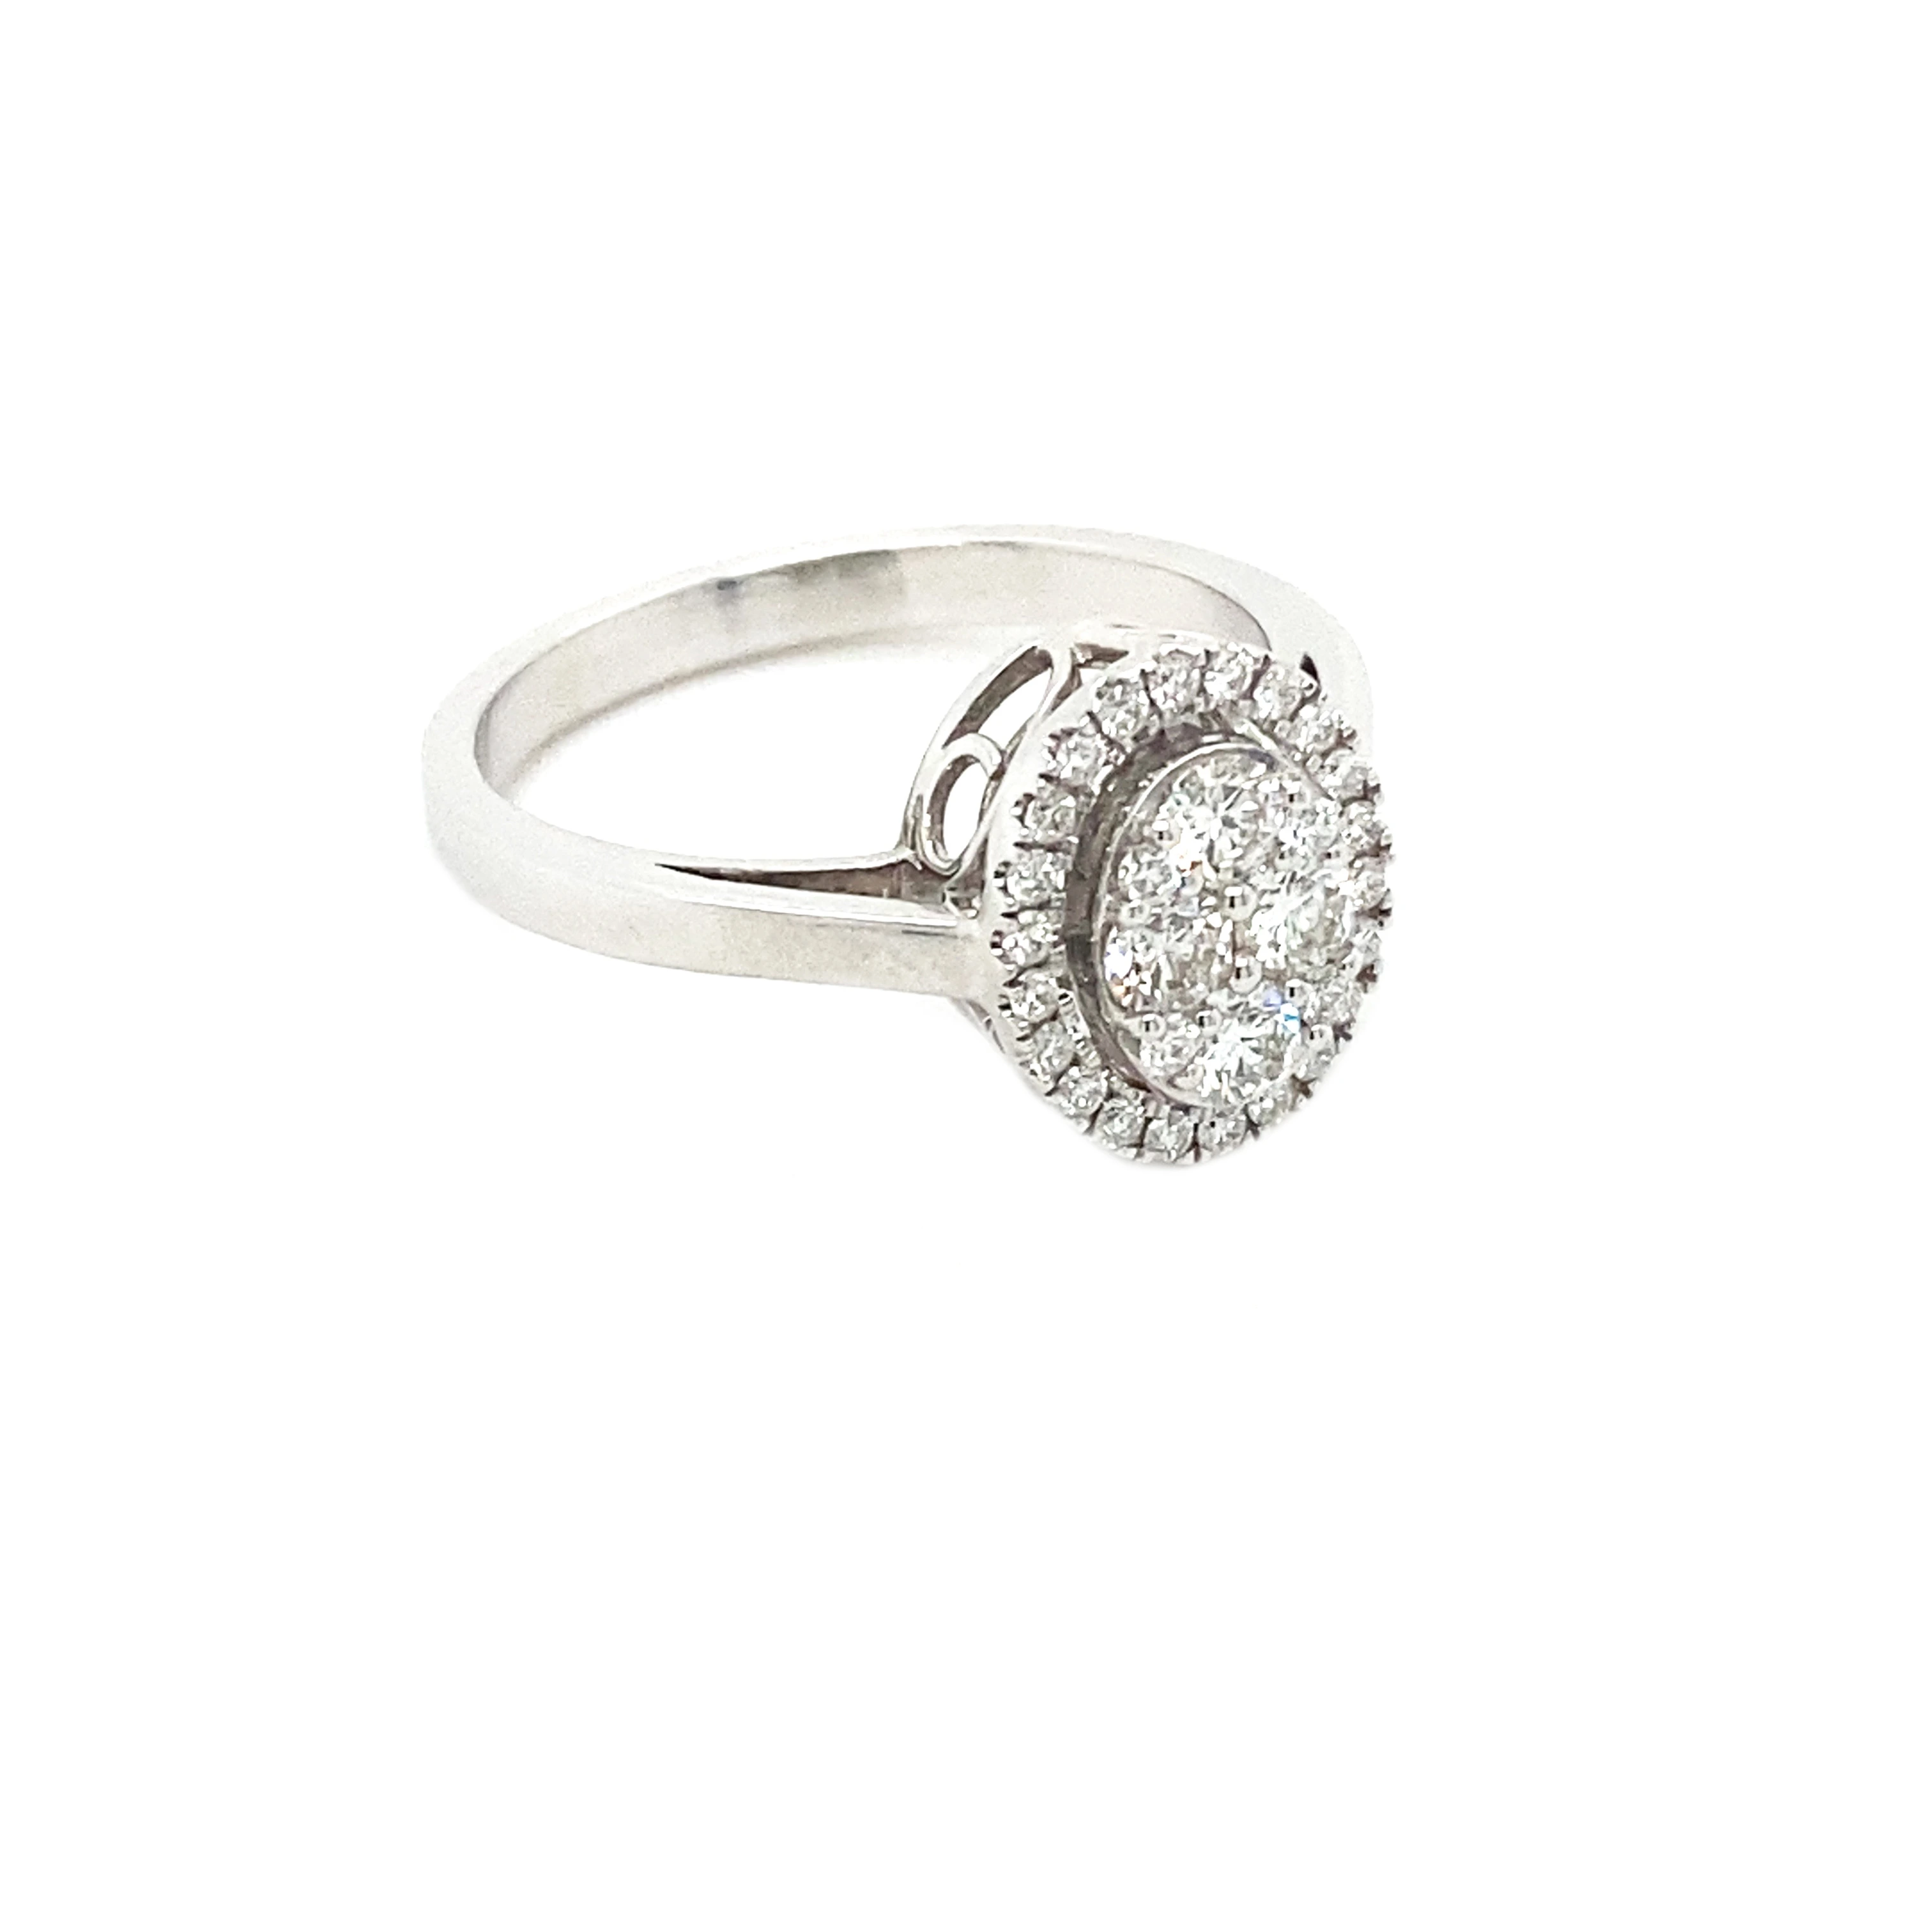 Oval Cluster Diamond Ring